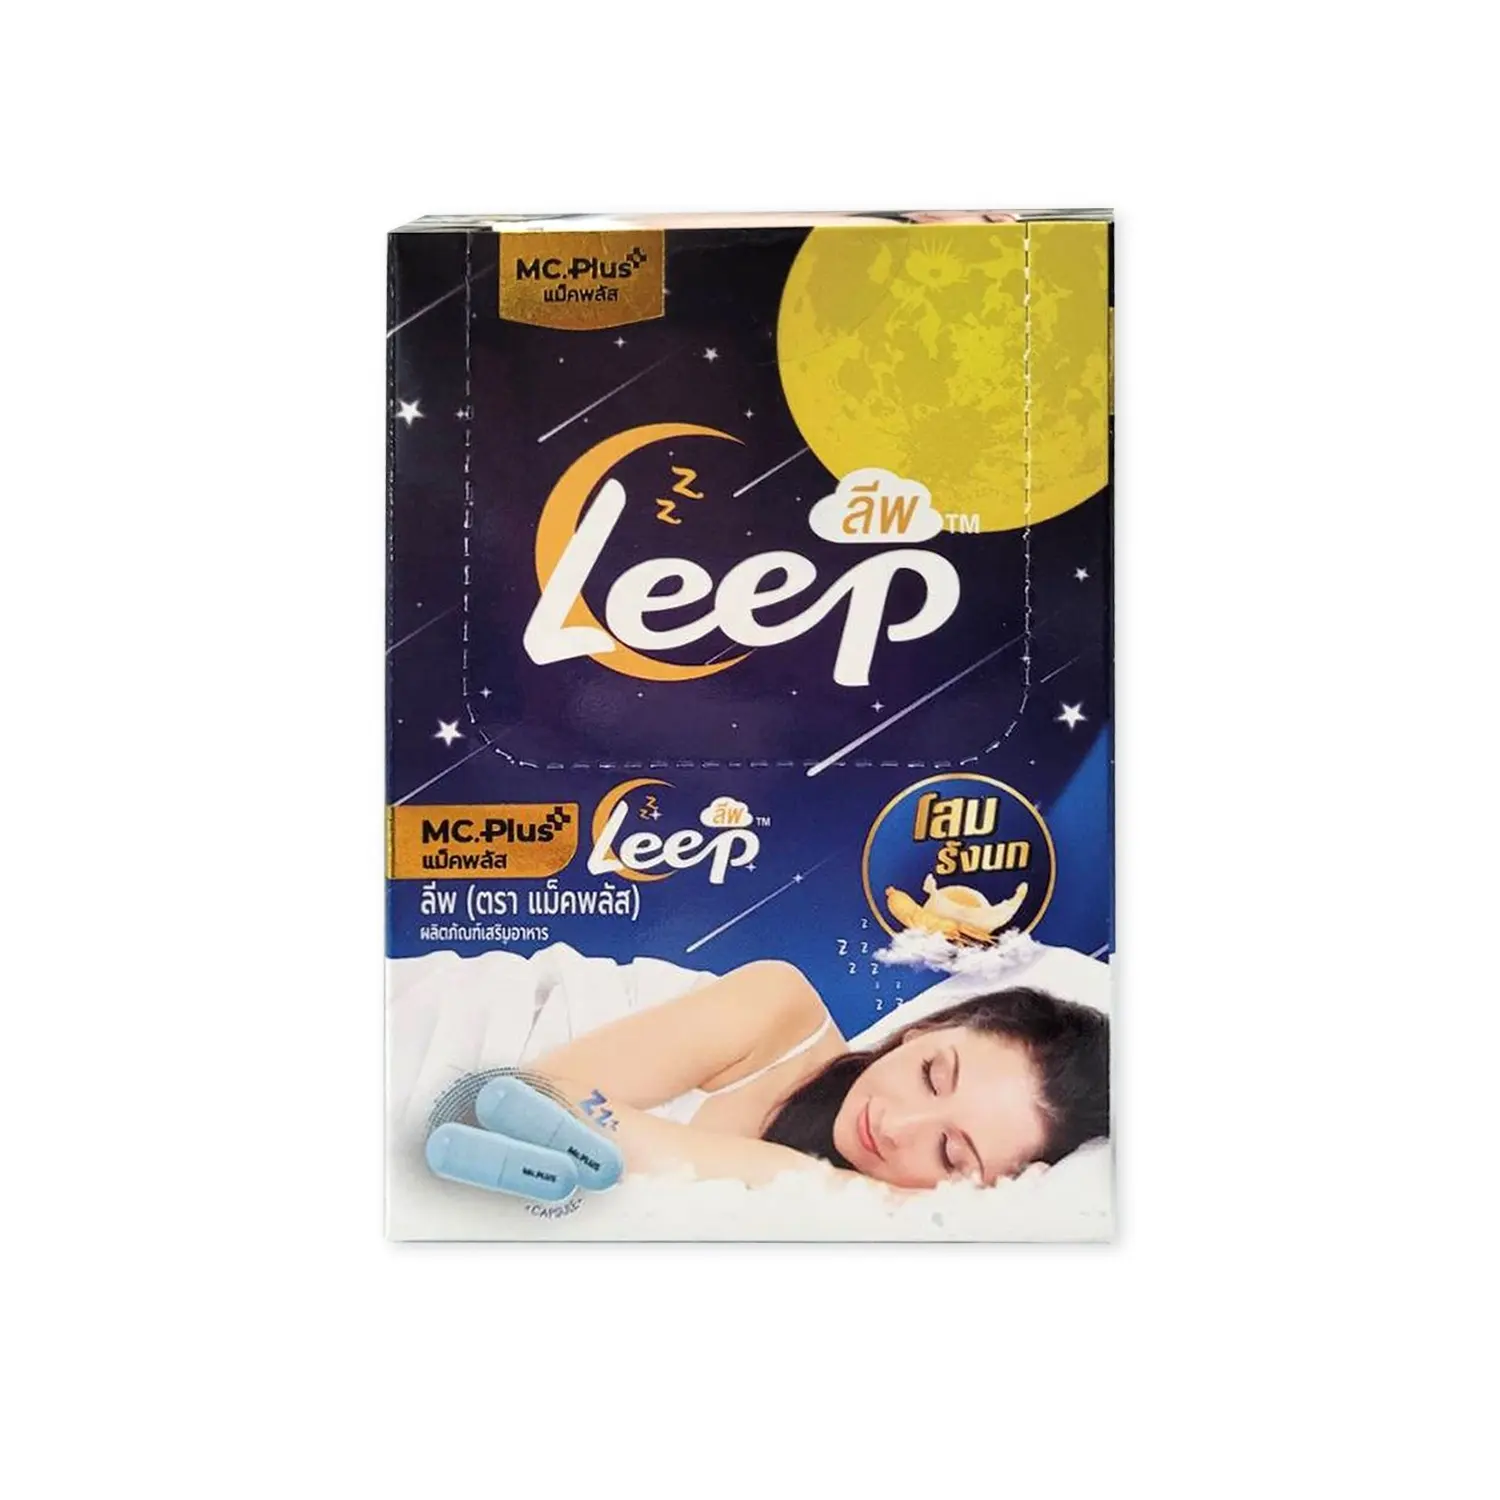 Leep Sleep Easy Supplement Health Care Safe Manufacturing Price Thai Product Herbs Sleepwell Relax Pills Natural Night OEM